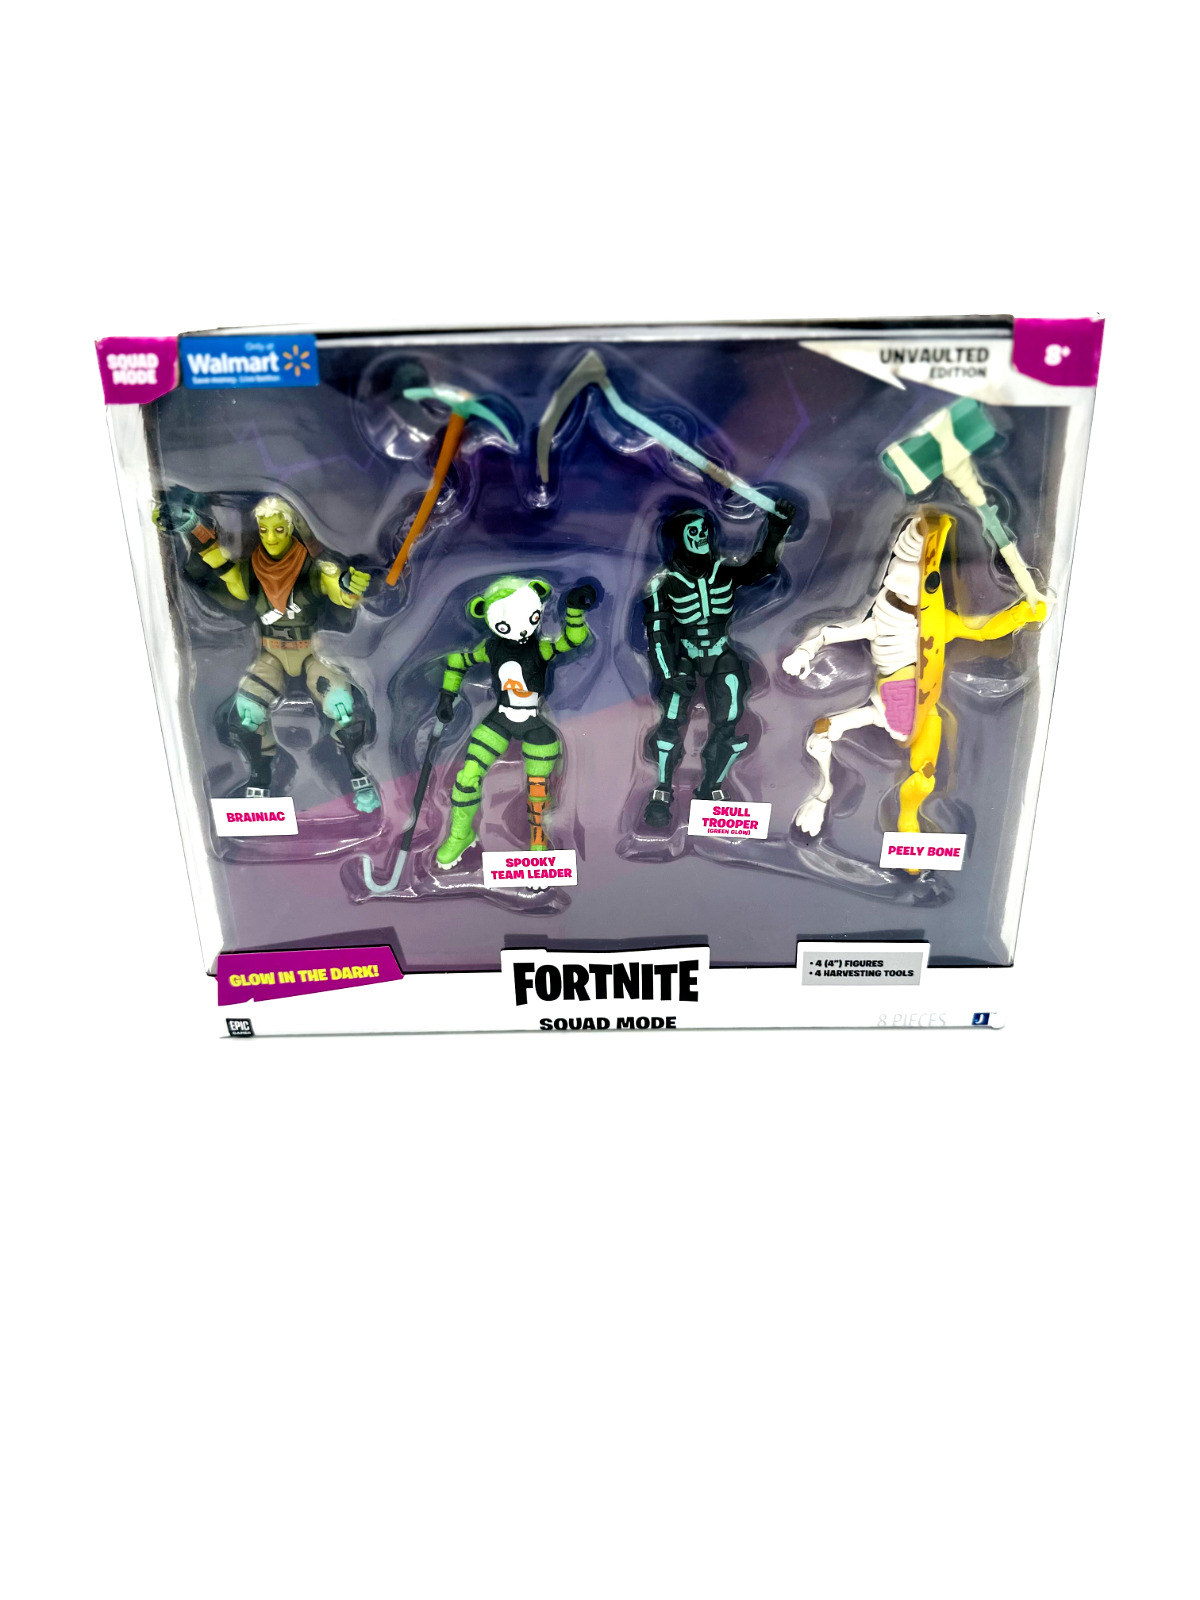 Fortnite Squad Mode Glow In The Dark 4 Action Figure Unvaulted Walmart Exclusive